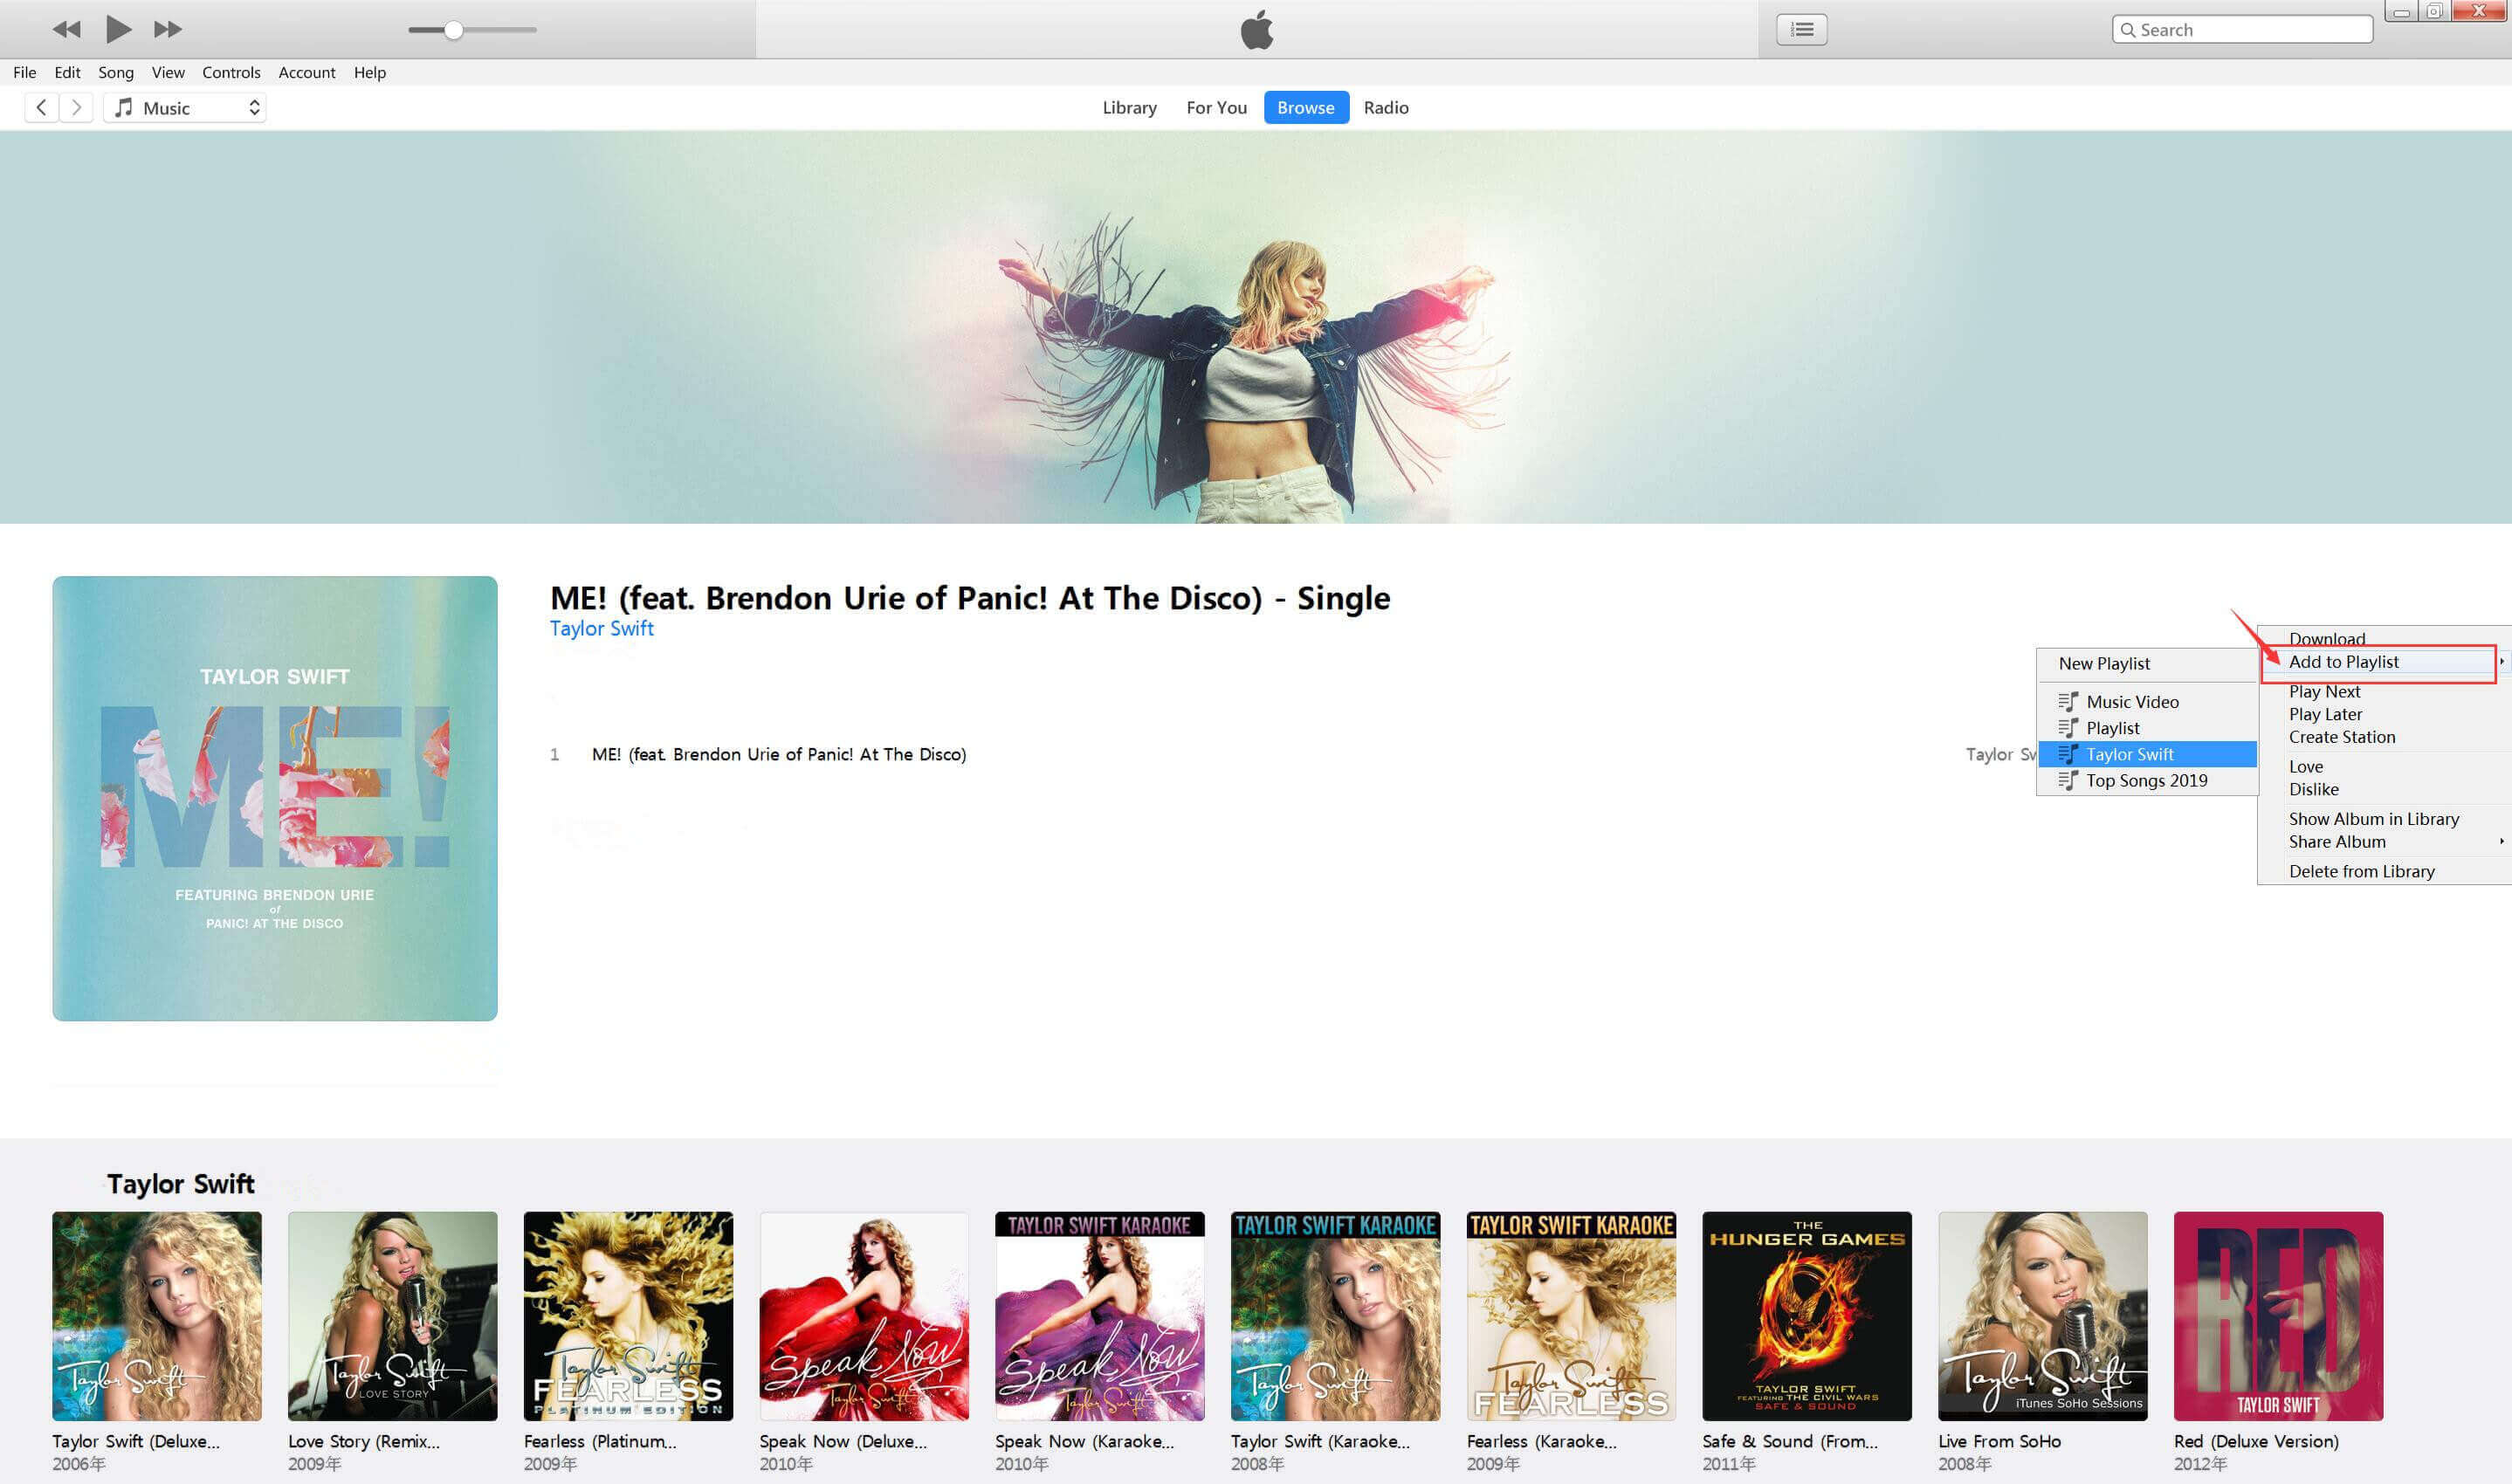 add Taylor Swift Songs from iTunes Store to iTunes Library